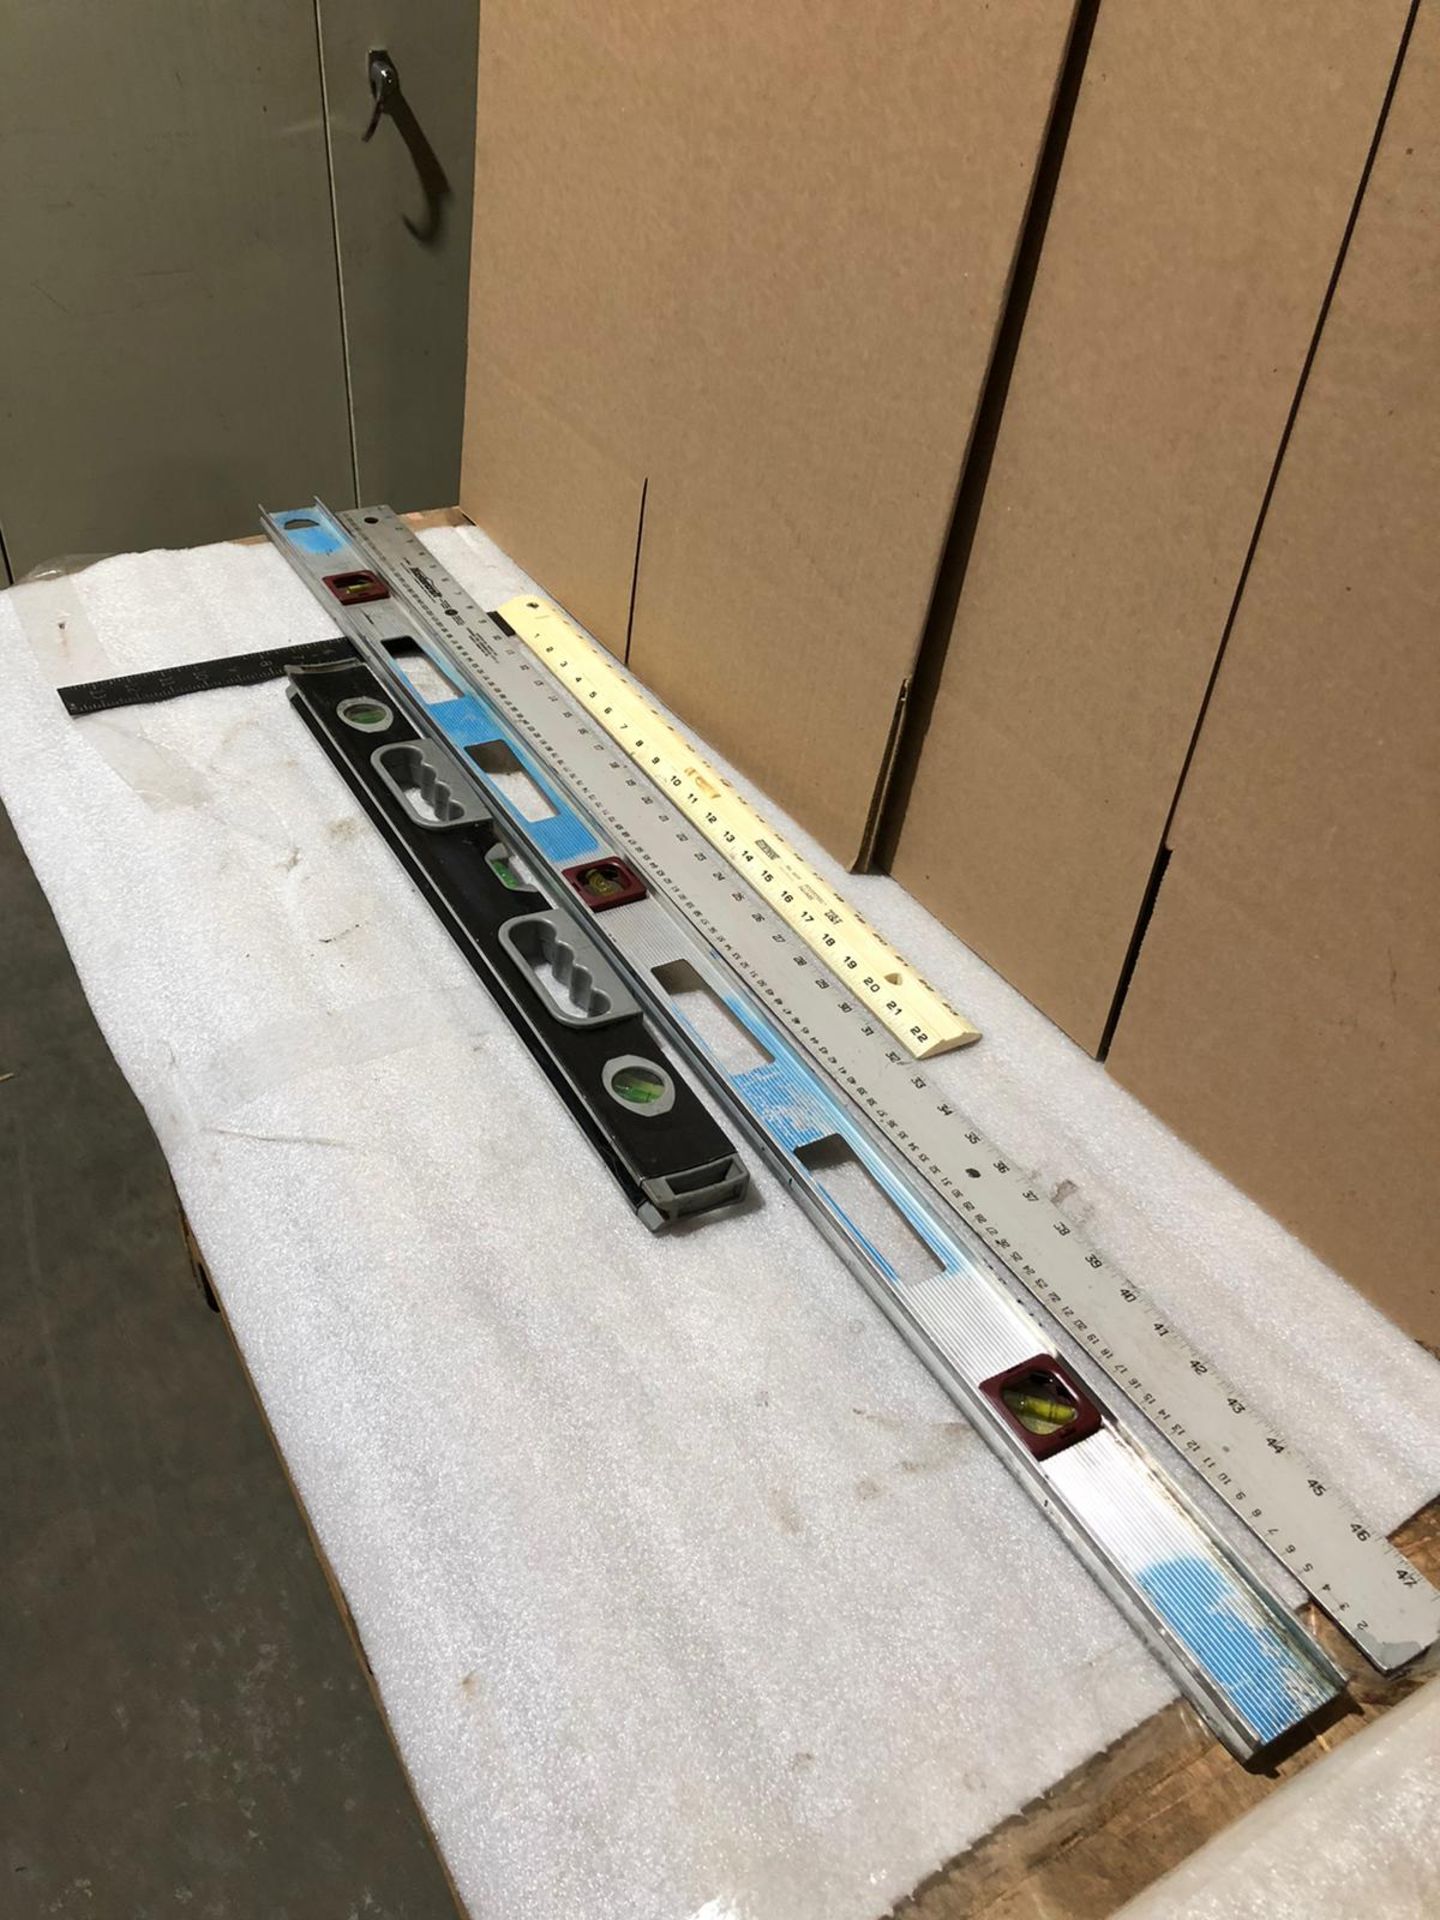 Lot of 4 (4 units) Precision Levels and Rulers *** FROM 5-STAR RIGGING - Image 2 of 2